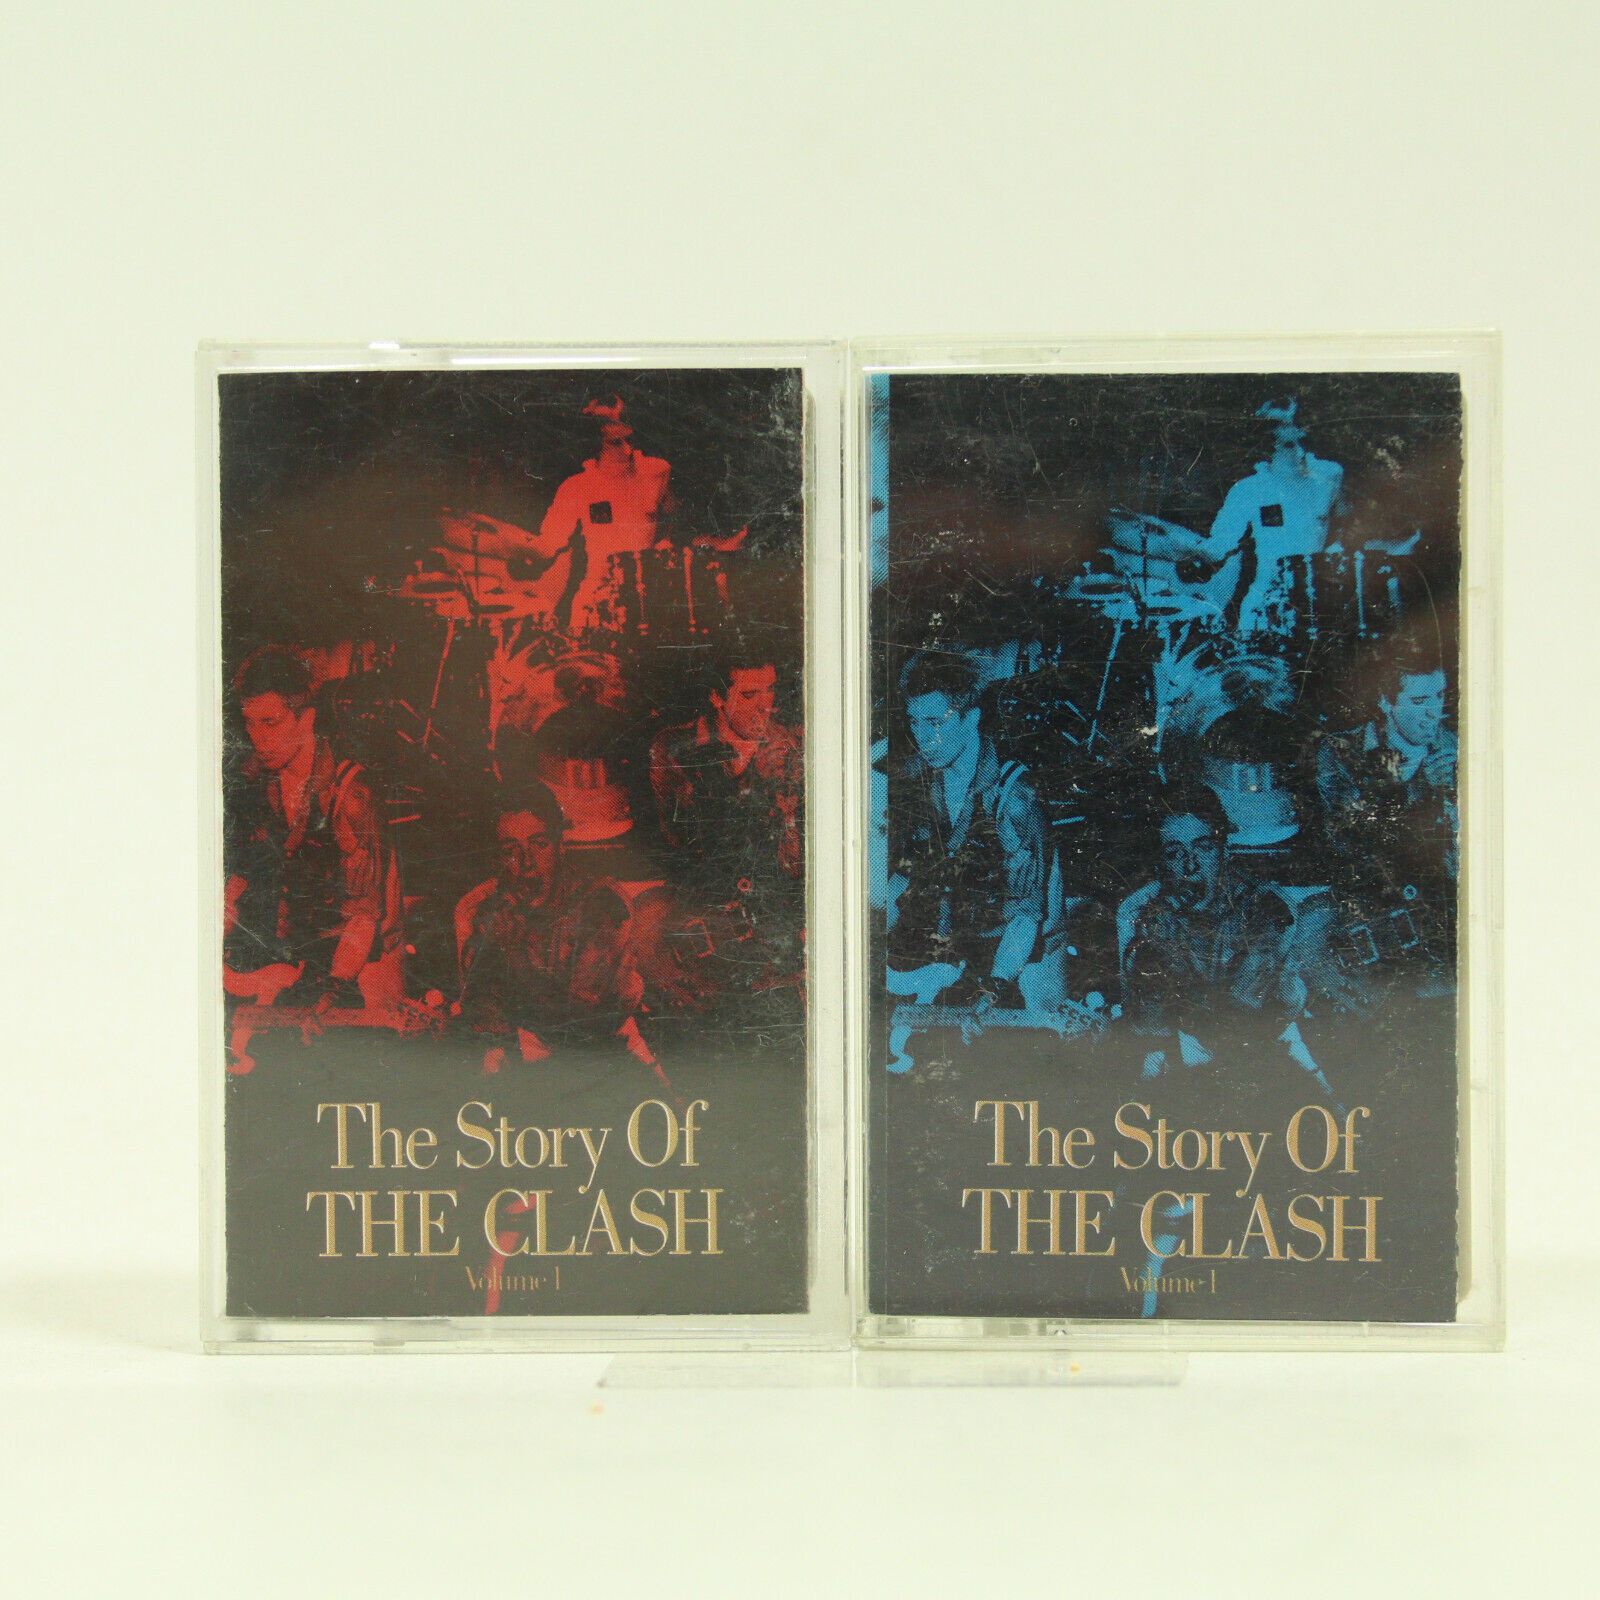 The Story of The Clash Volume 1 - The Clash Double Cassette Tape Set Epic